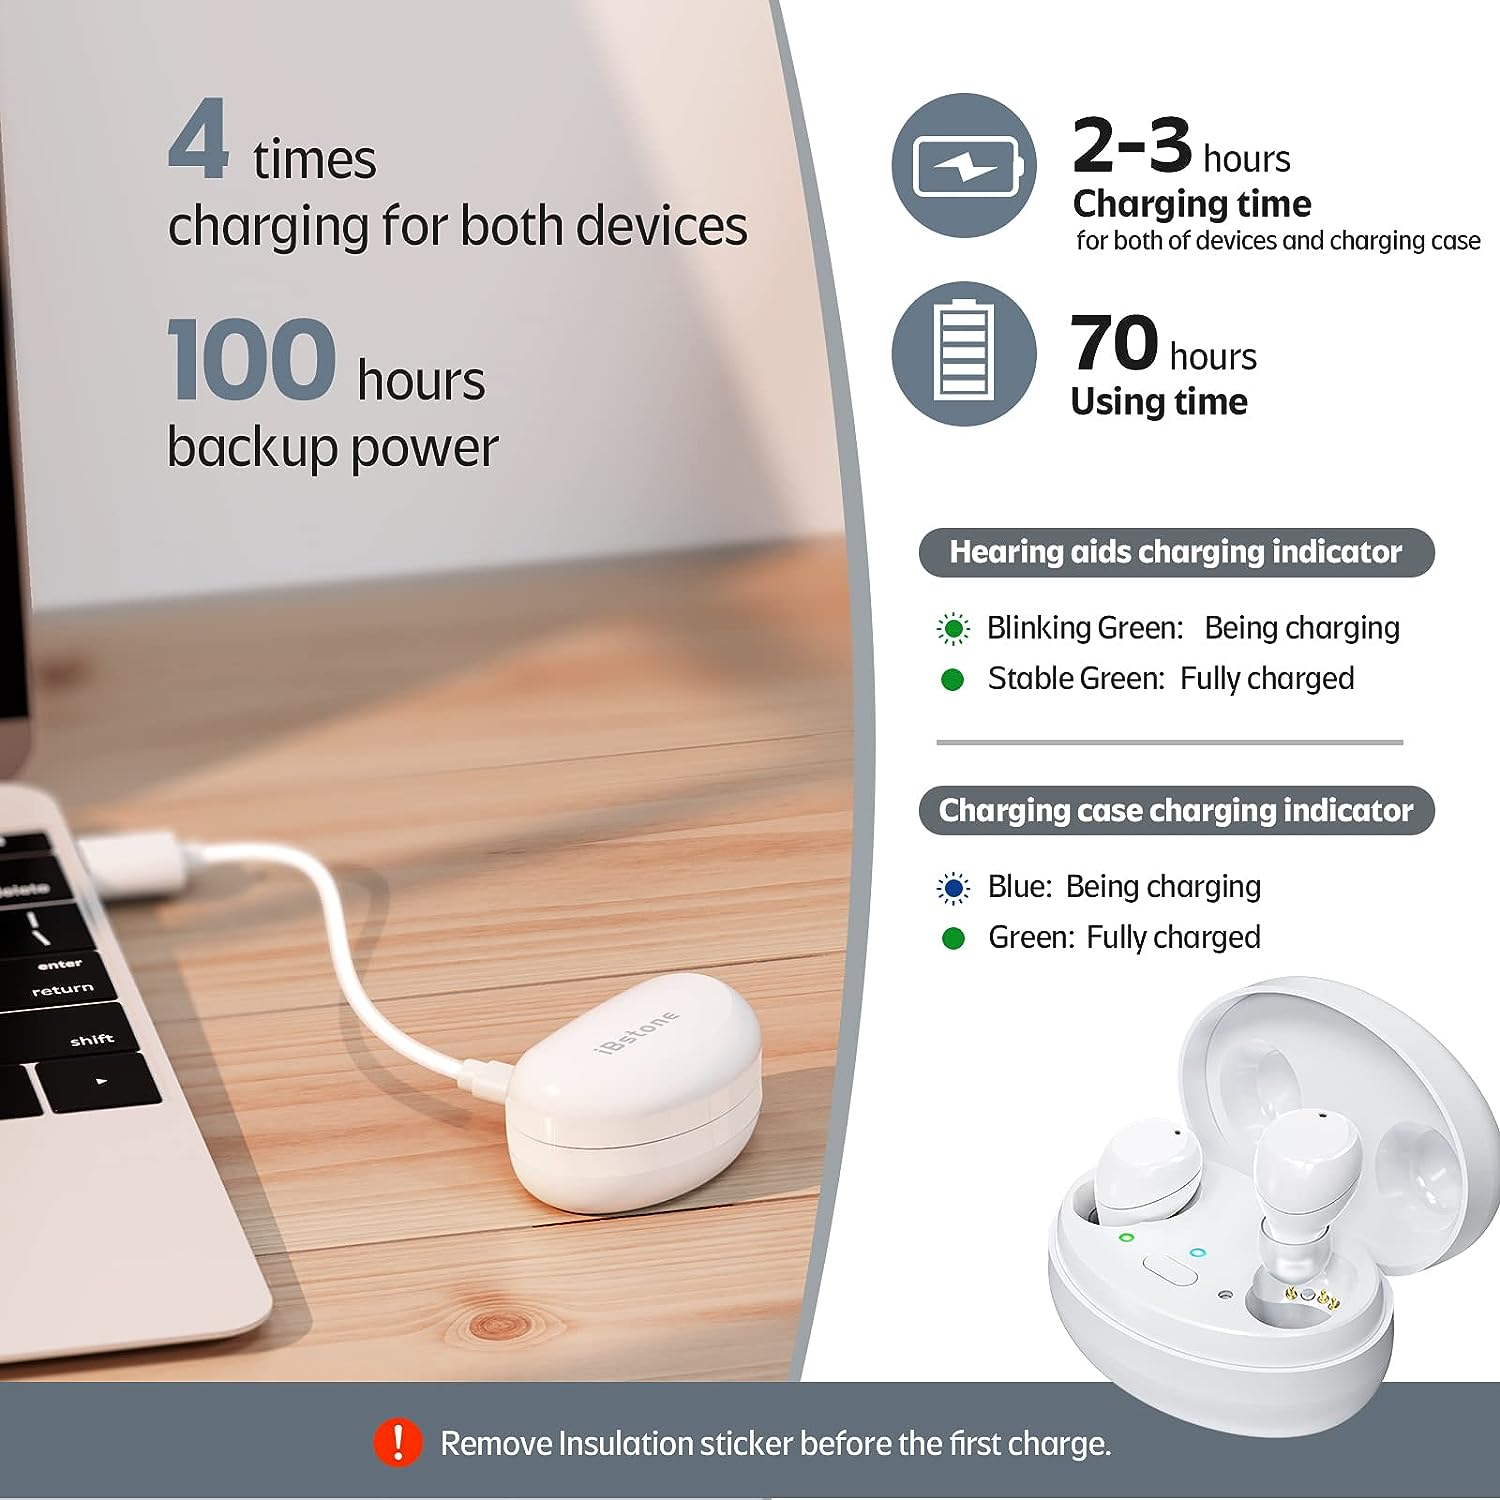 iBstone K22 Rechargeable ITC Hearing aids